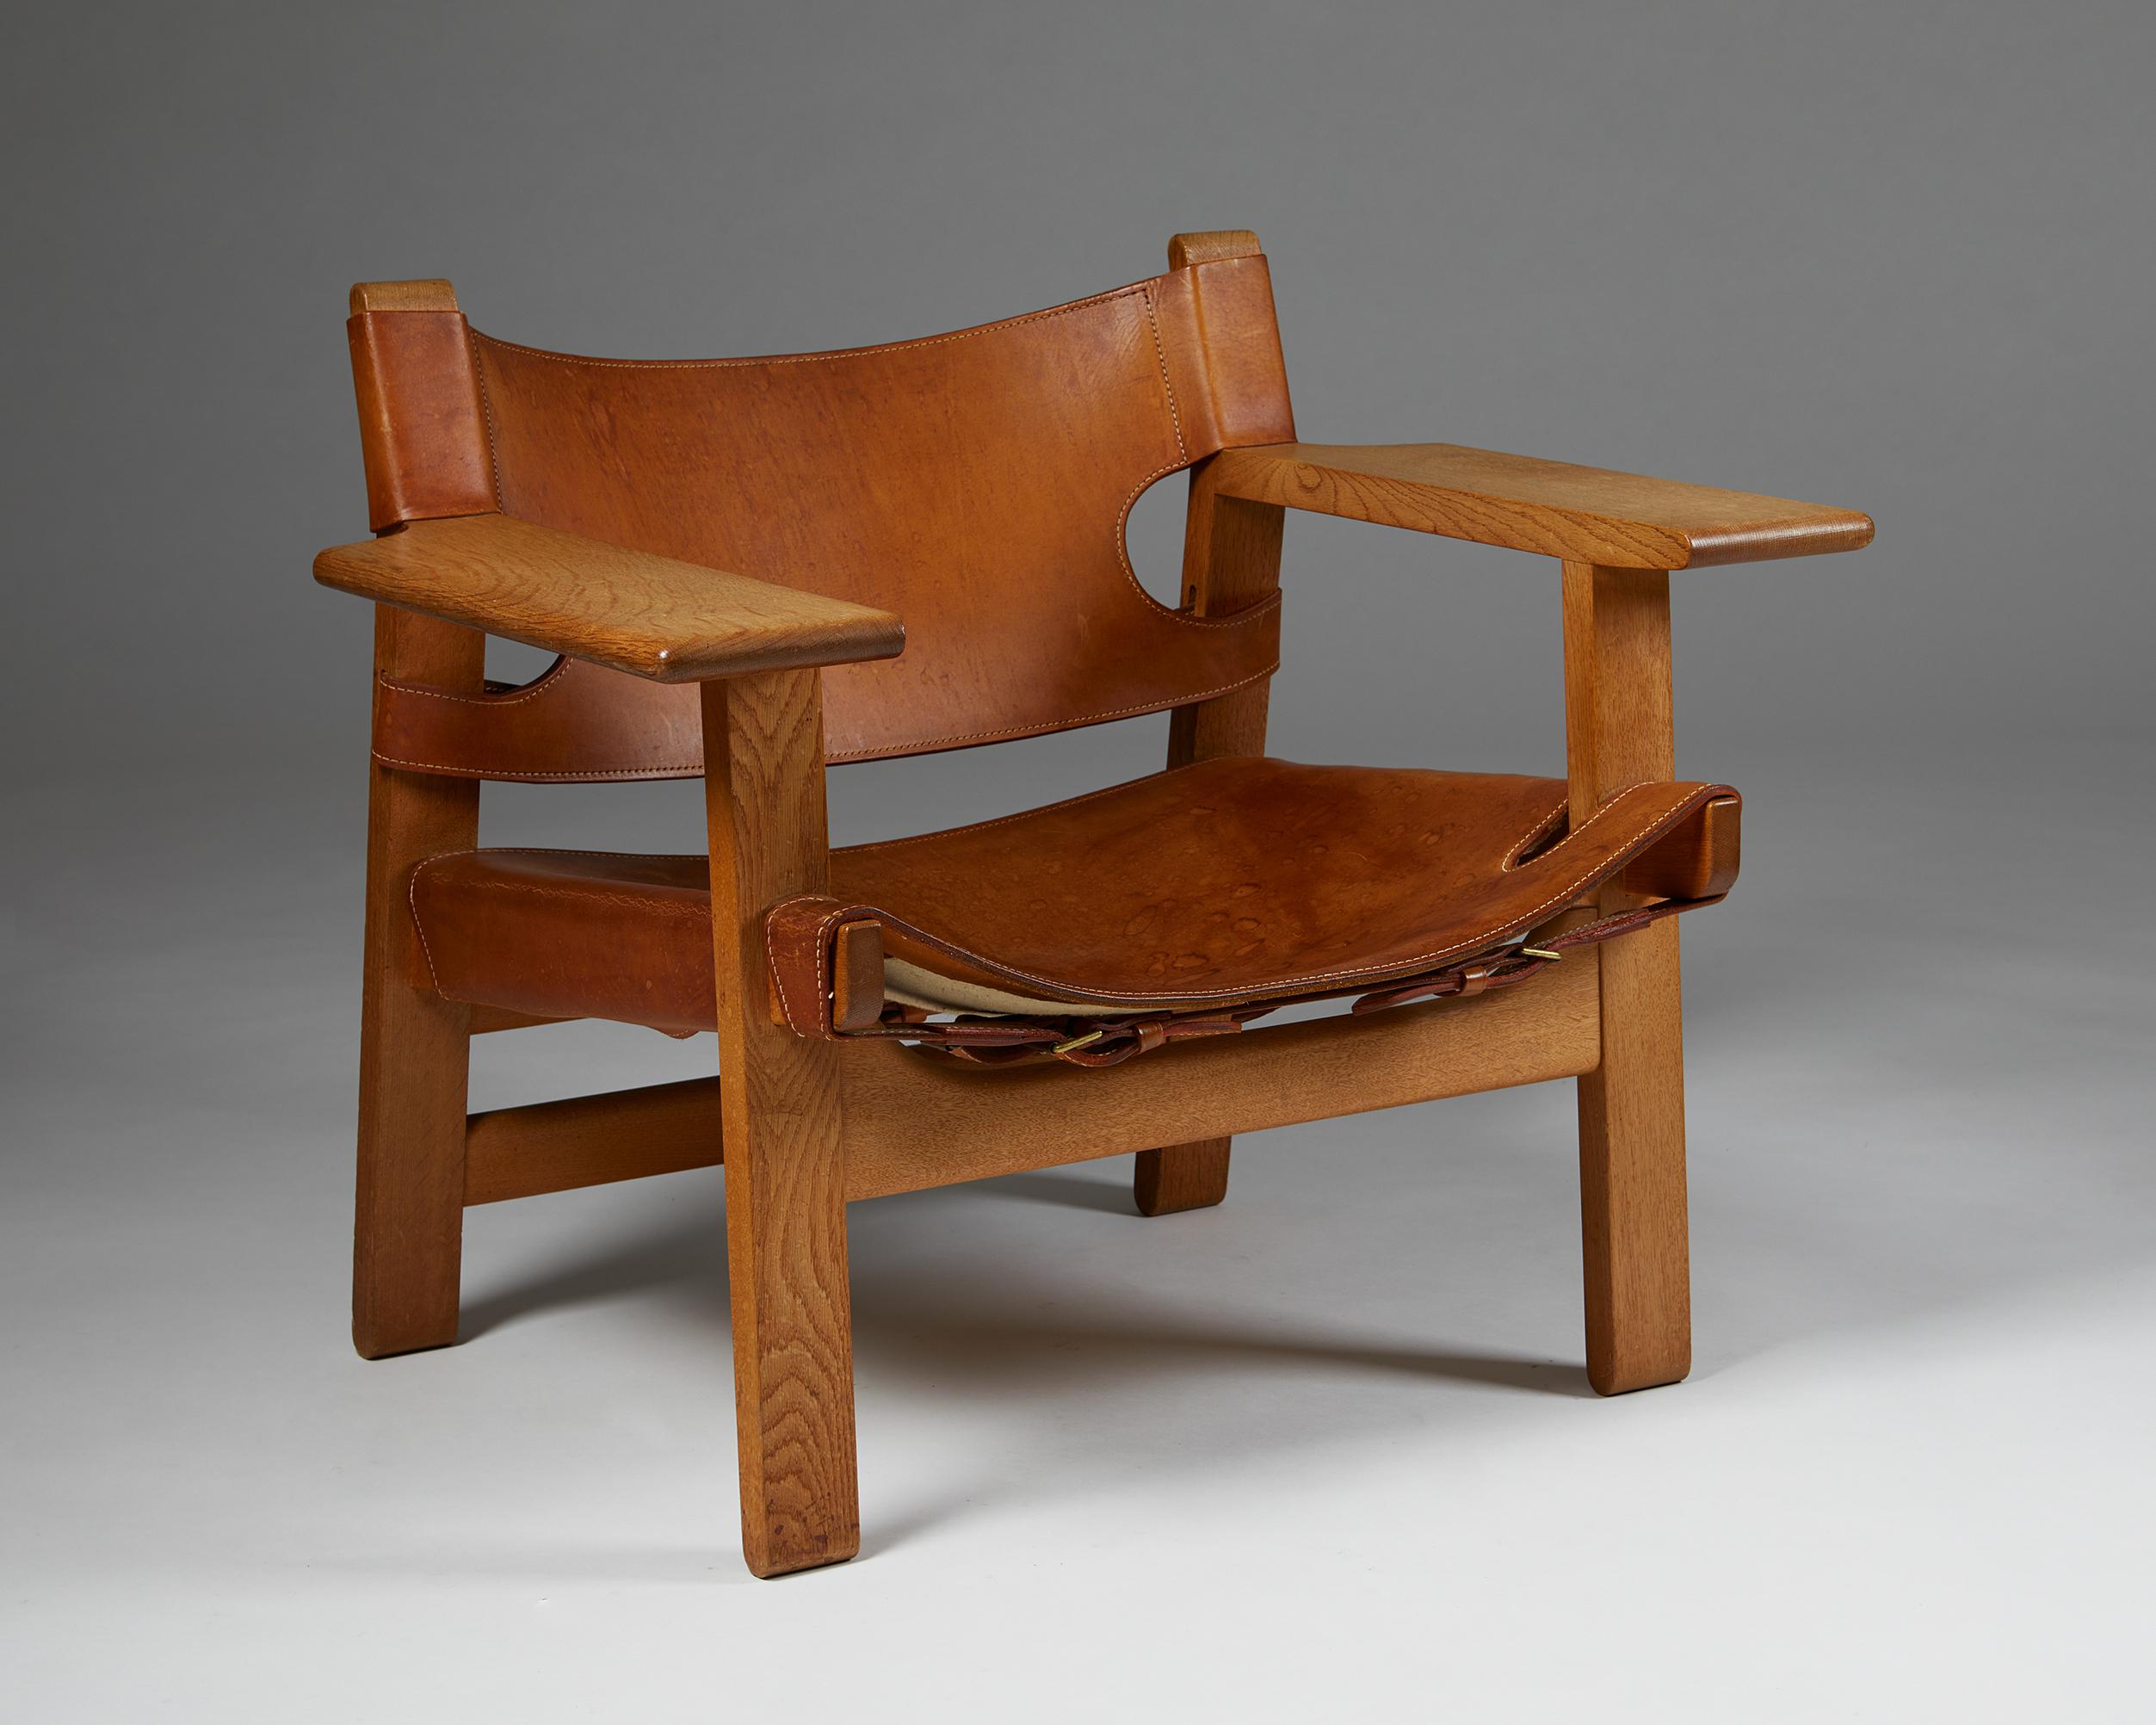 Oak and leather. 

Stamped.

The robust construction, simple lines, and natural materials of Børge Mogensen’s “Spanish Chair” make it one of the most significant 20th-century Danish design collectables. Mogensen designed the piece after a trip to